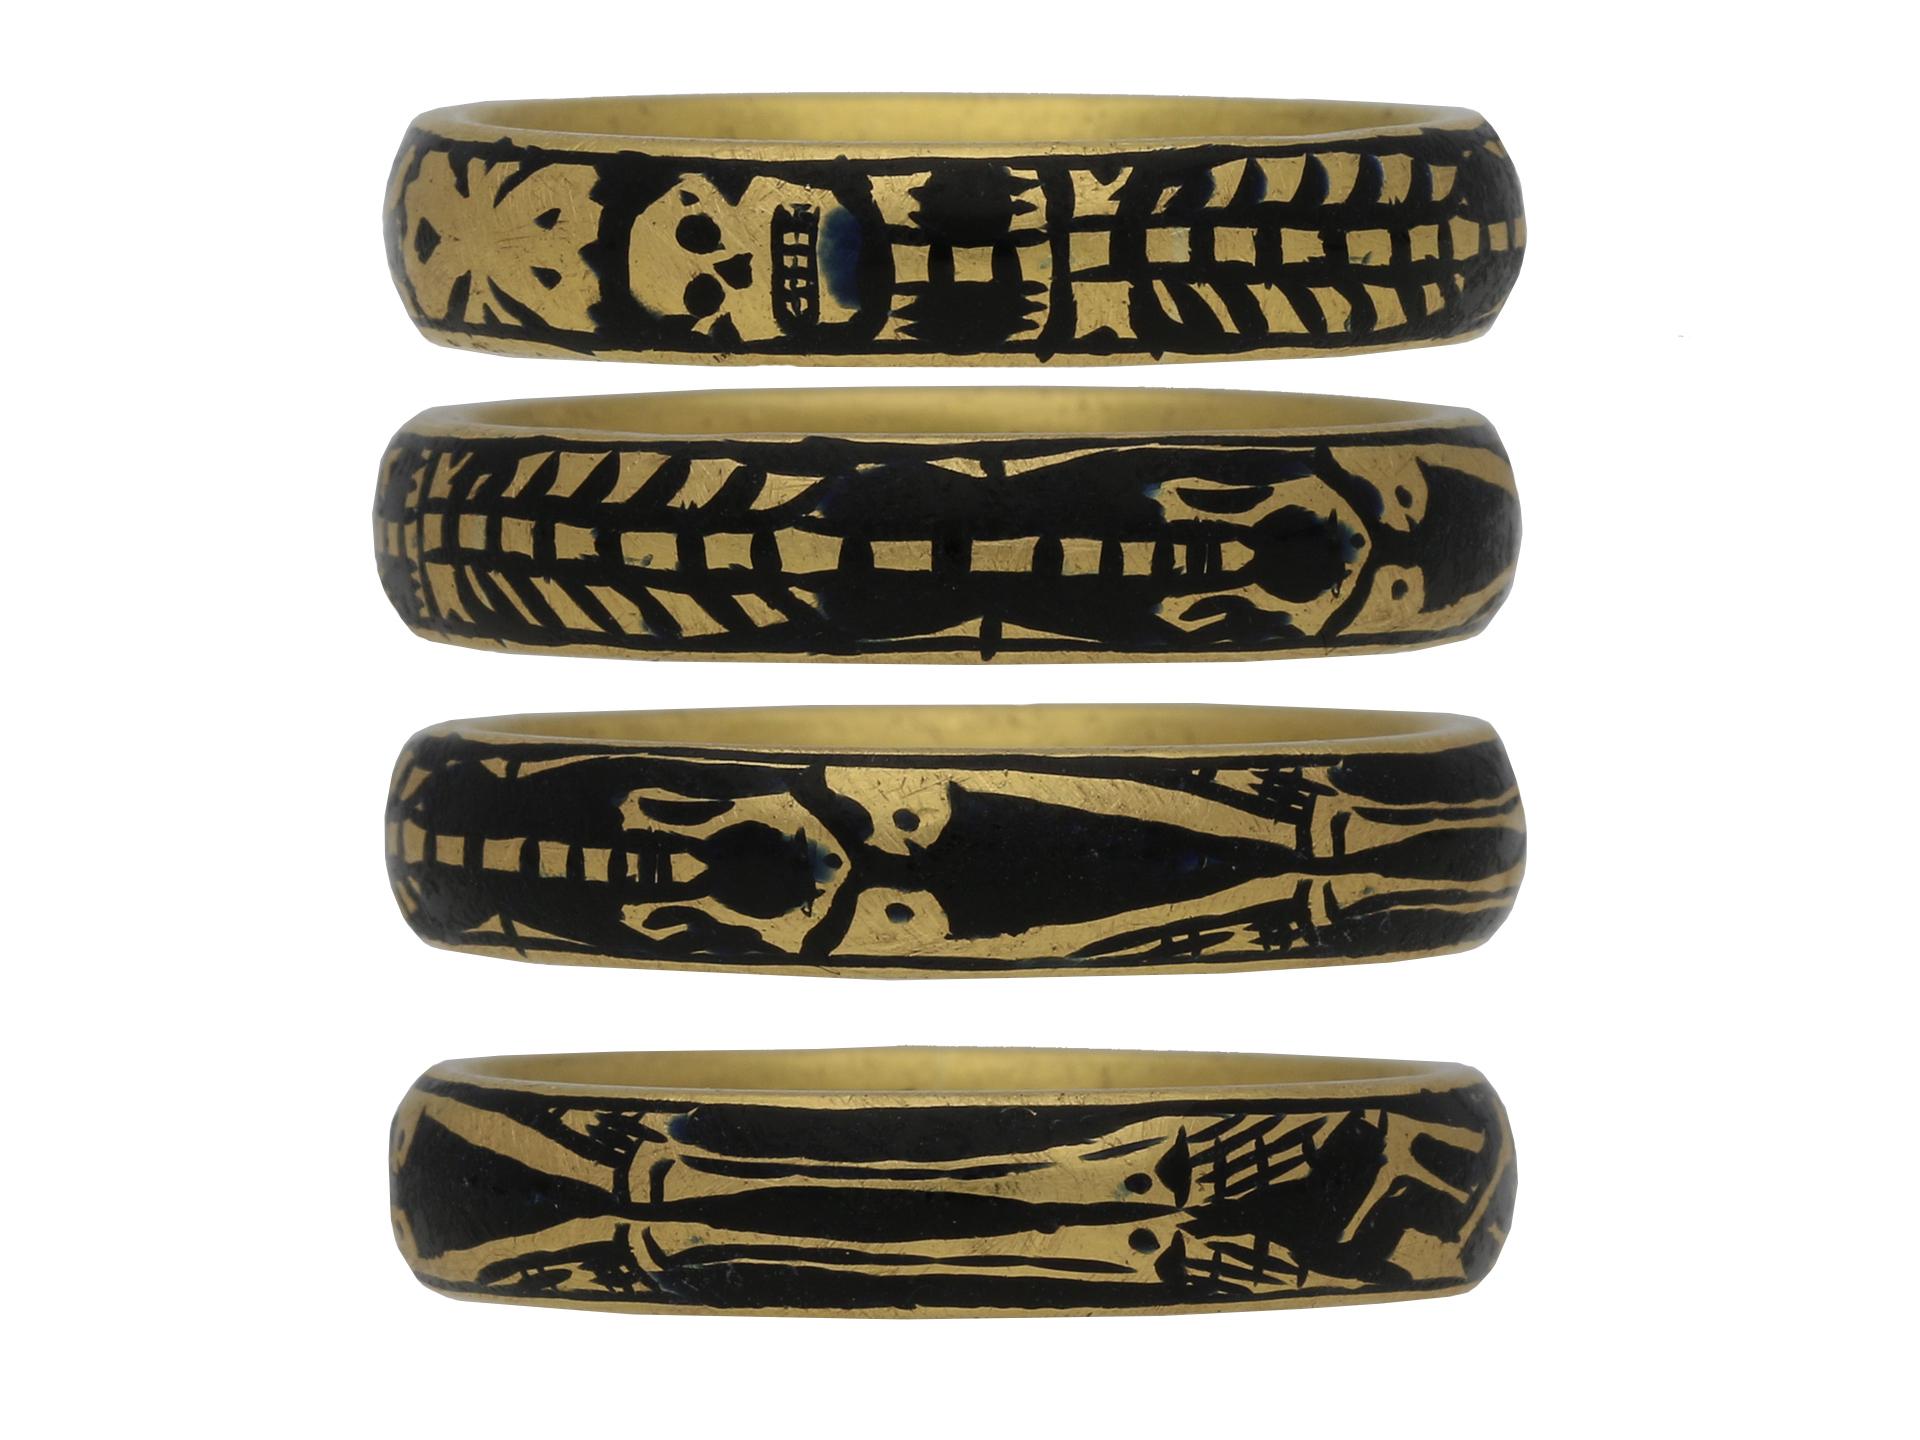 Georgian gold and enamel memorial skeleton ring. A solid D-shape gold band featuring an elongated skeleton with stylised skull and cross bones motif on a black enamel background, engraved on the inside in italic script and infilled in black enamel